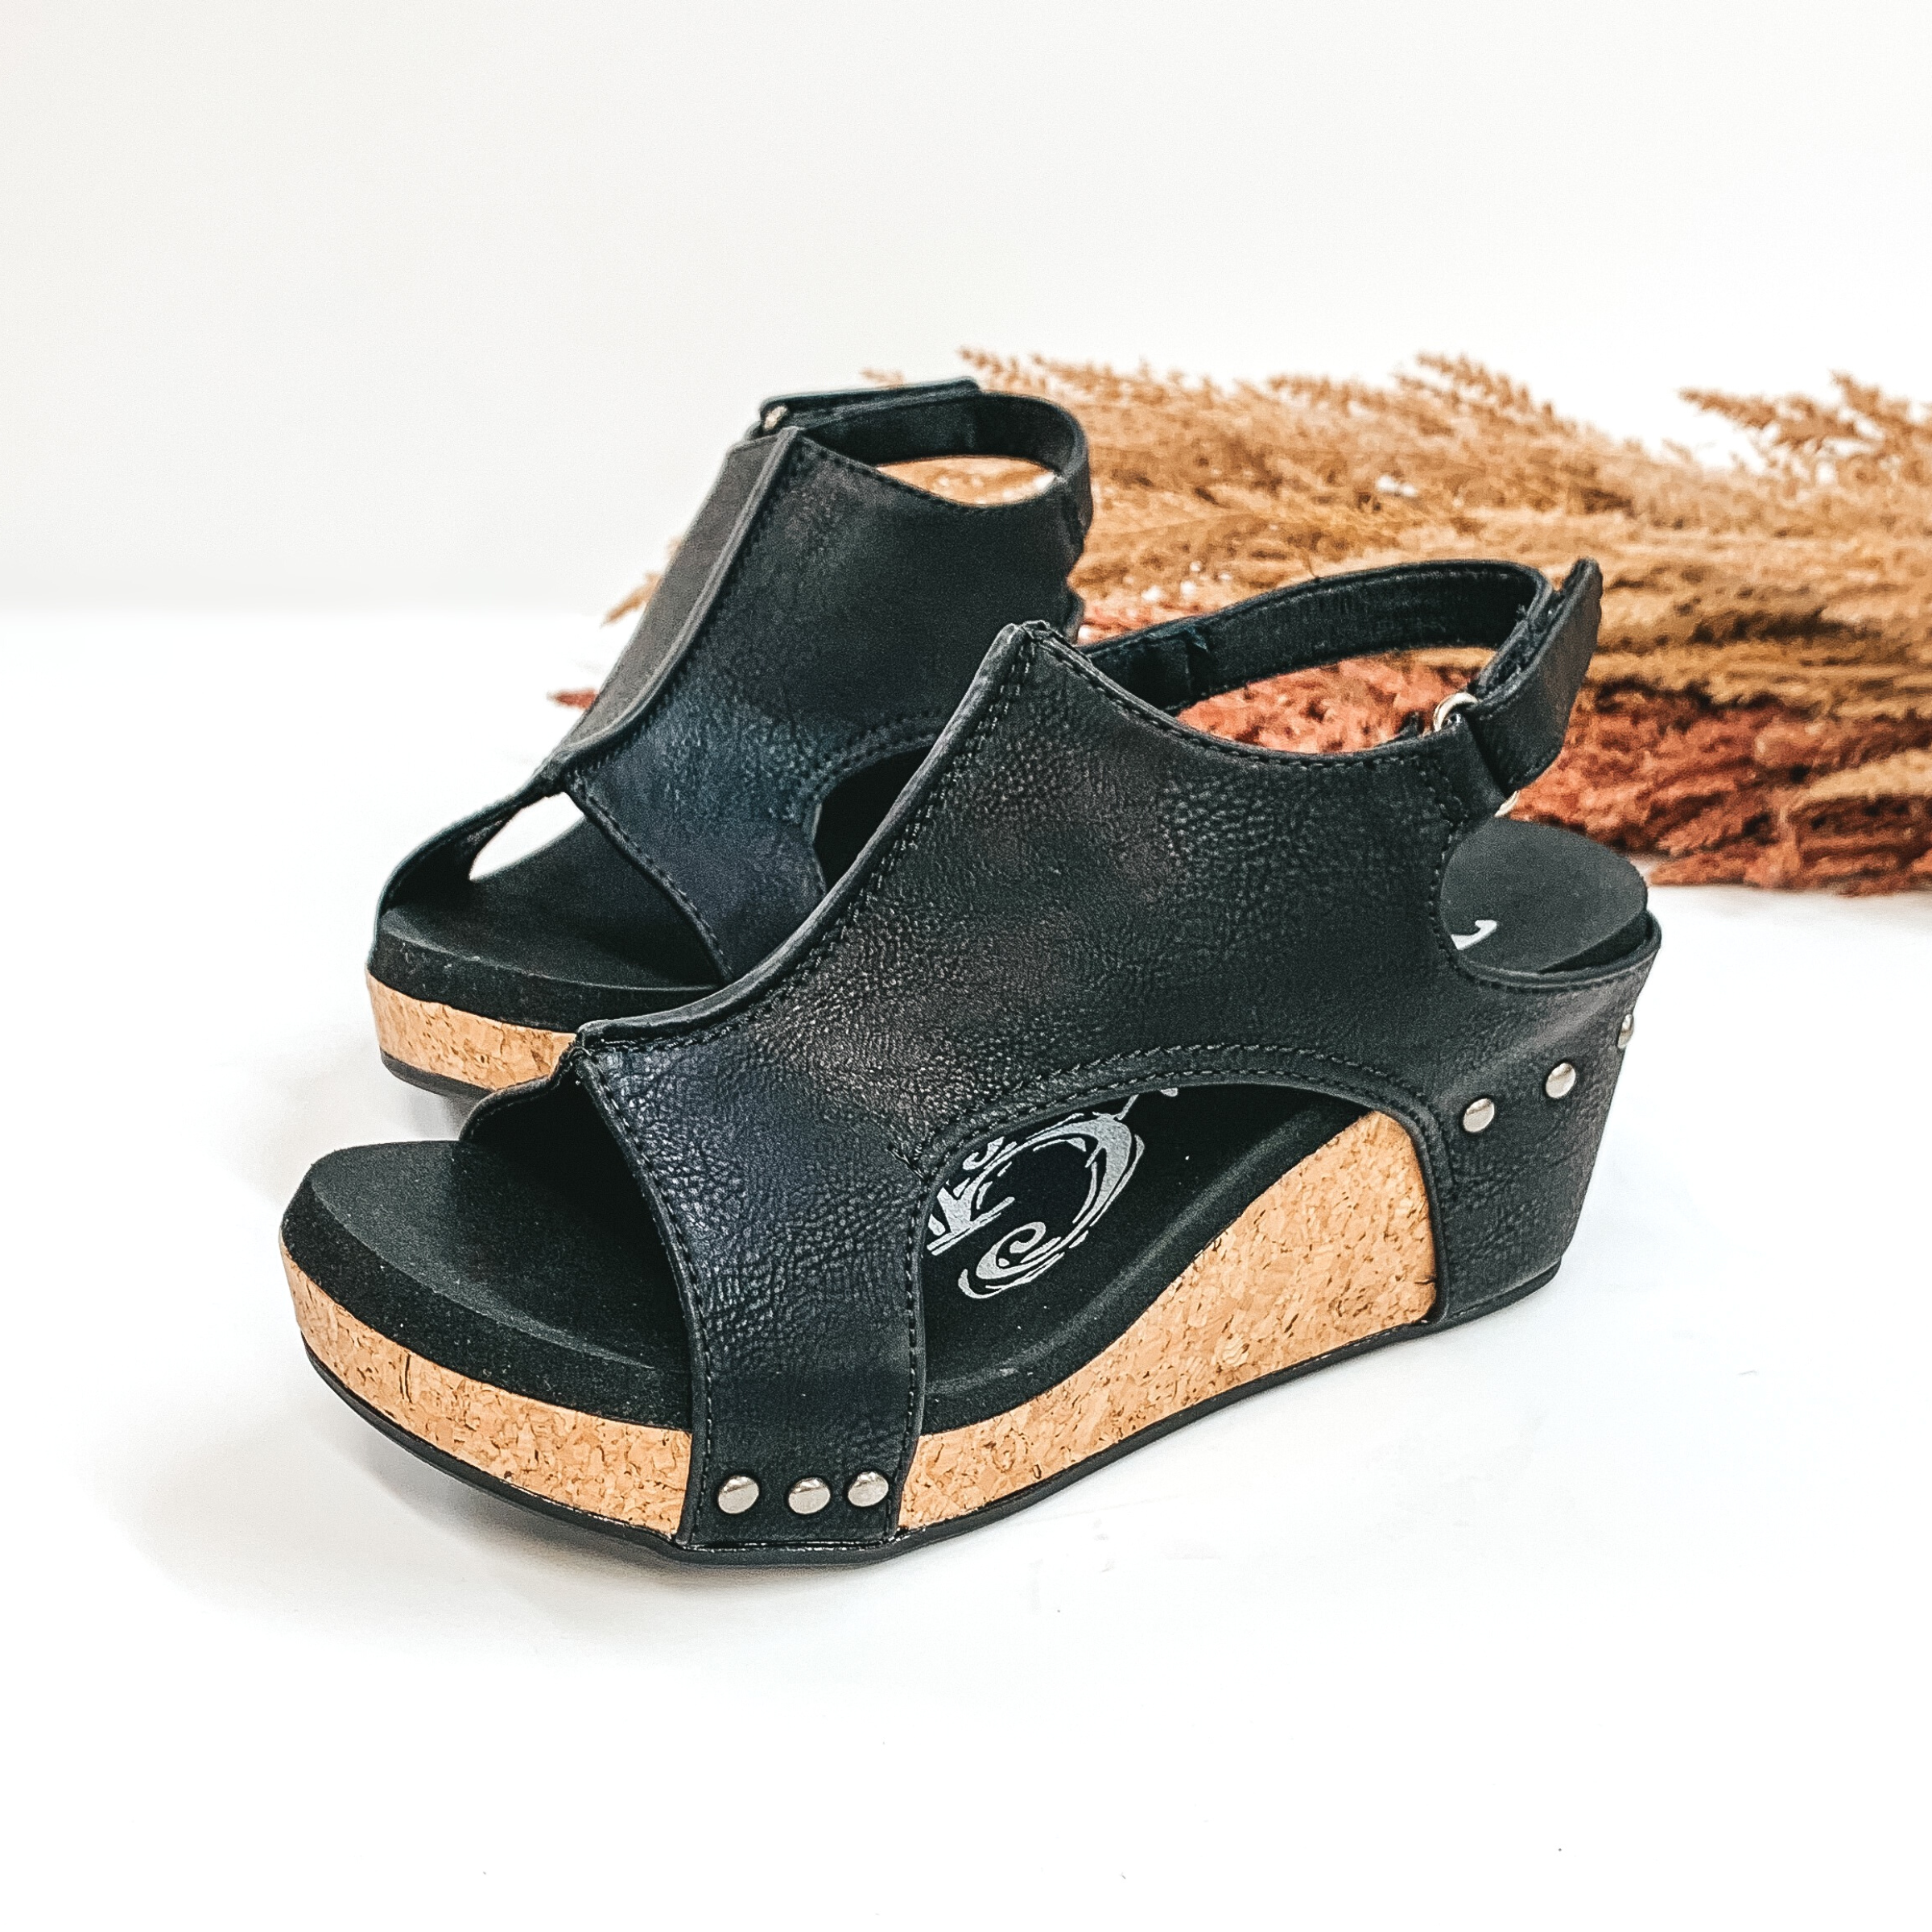 Very G | Trading Secrets Wedge Sandal with Velcro Strap in Black